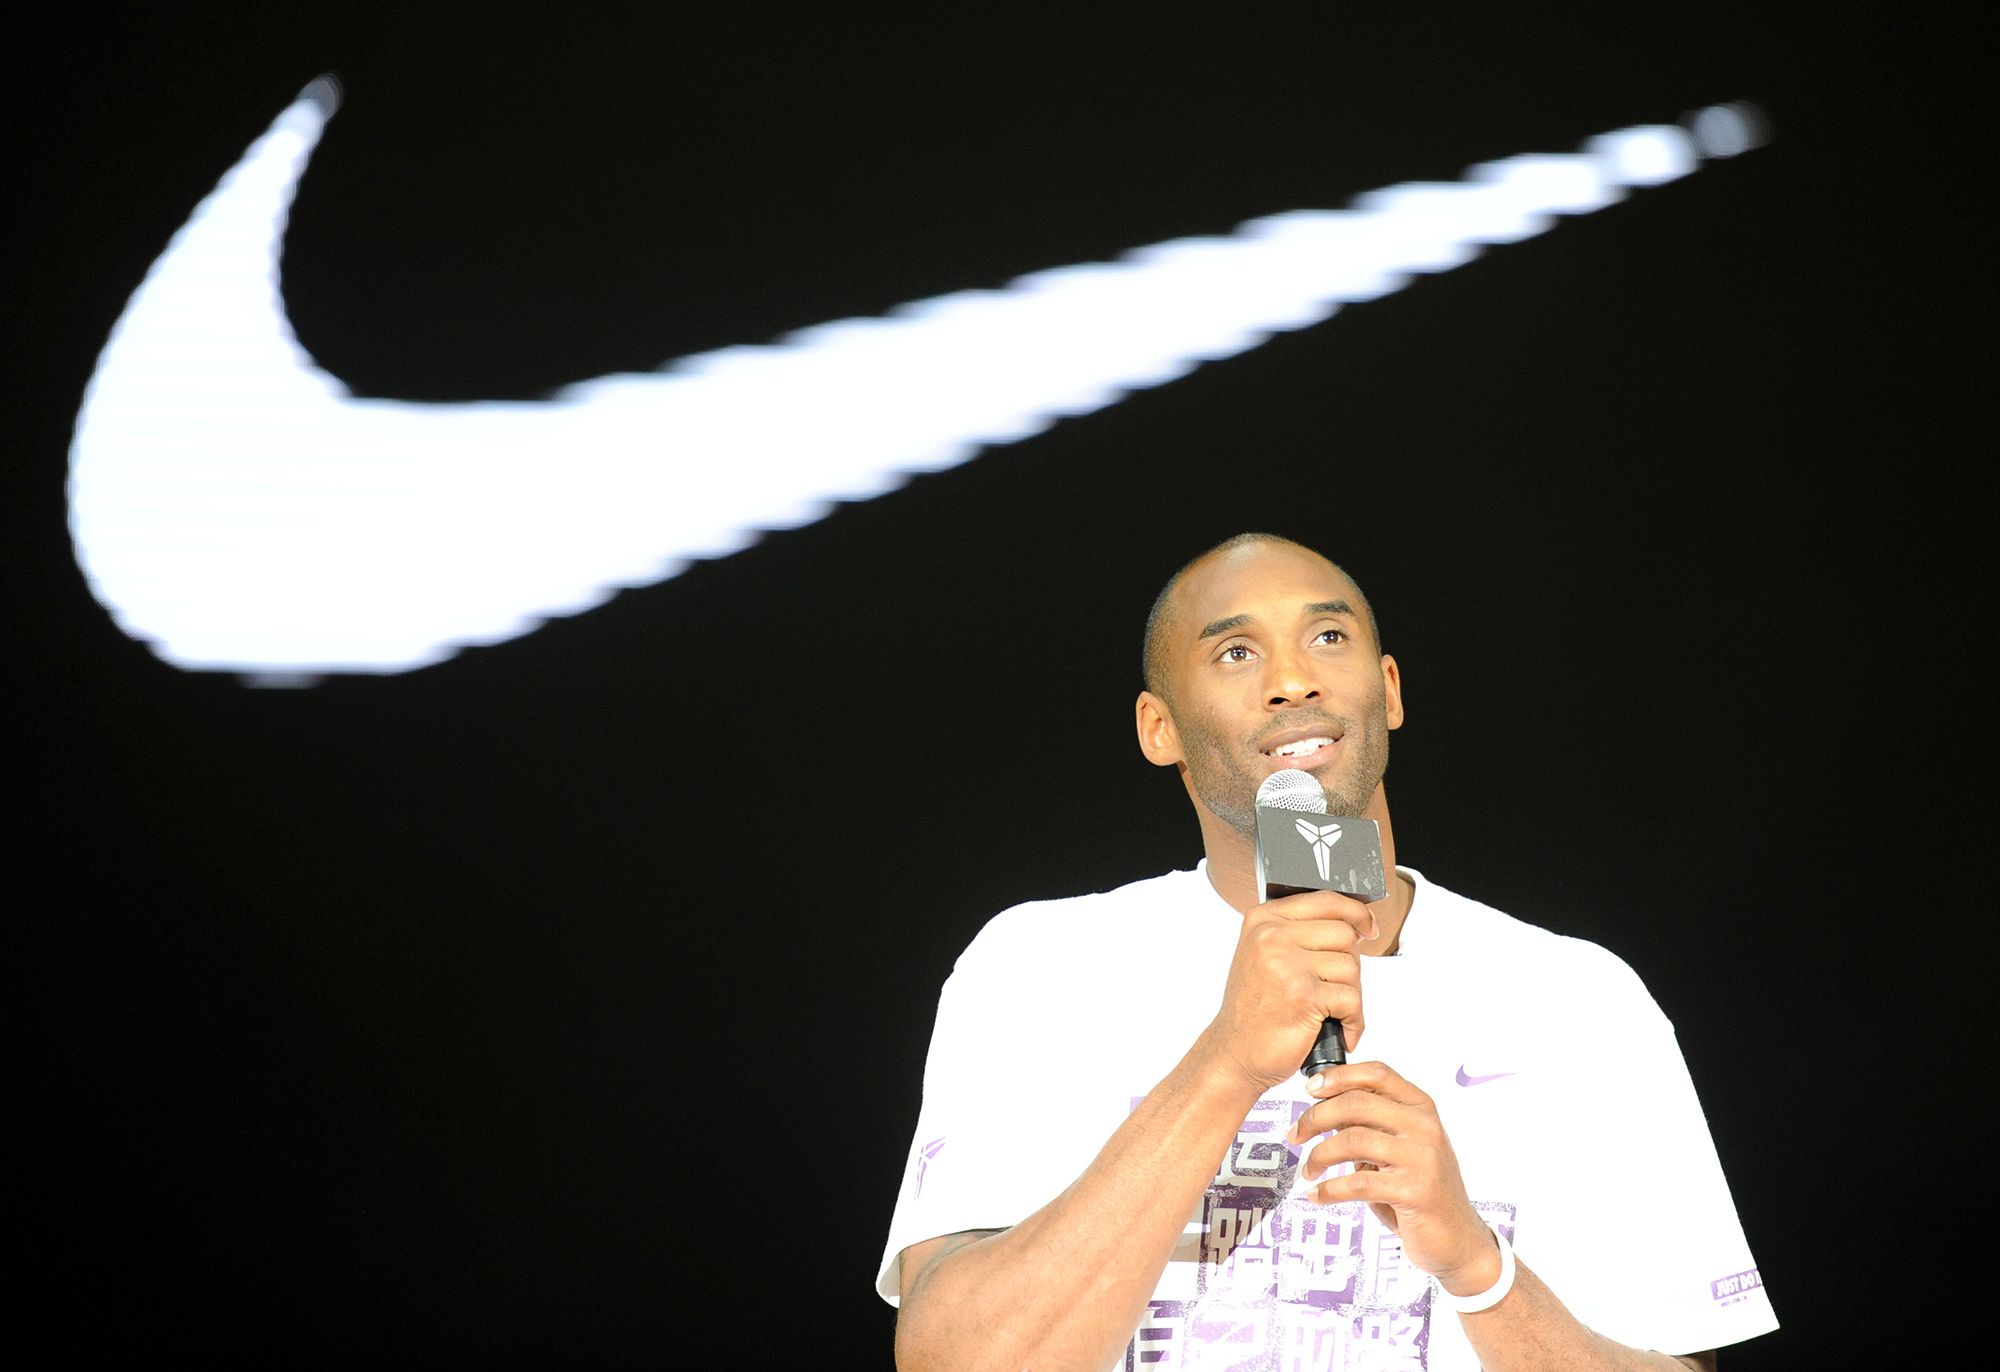 Kobe Bryant's Estate And Nike Continue Partnership With New Deal –